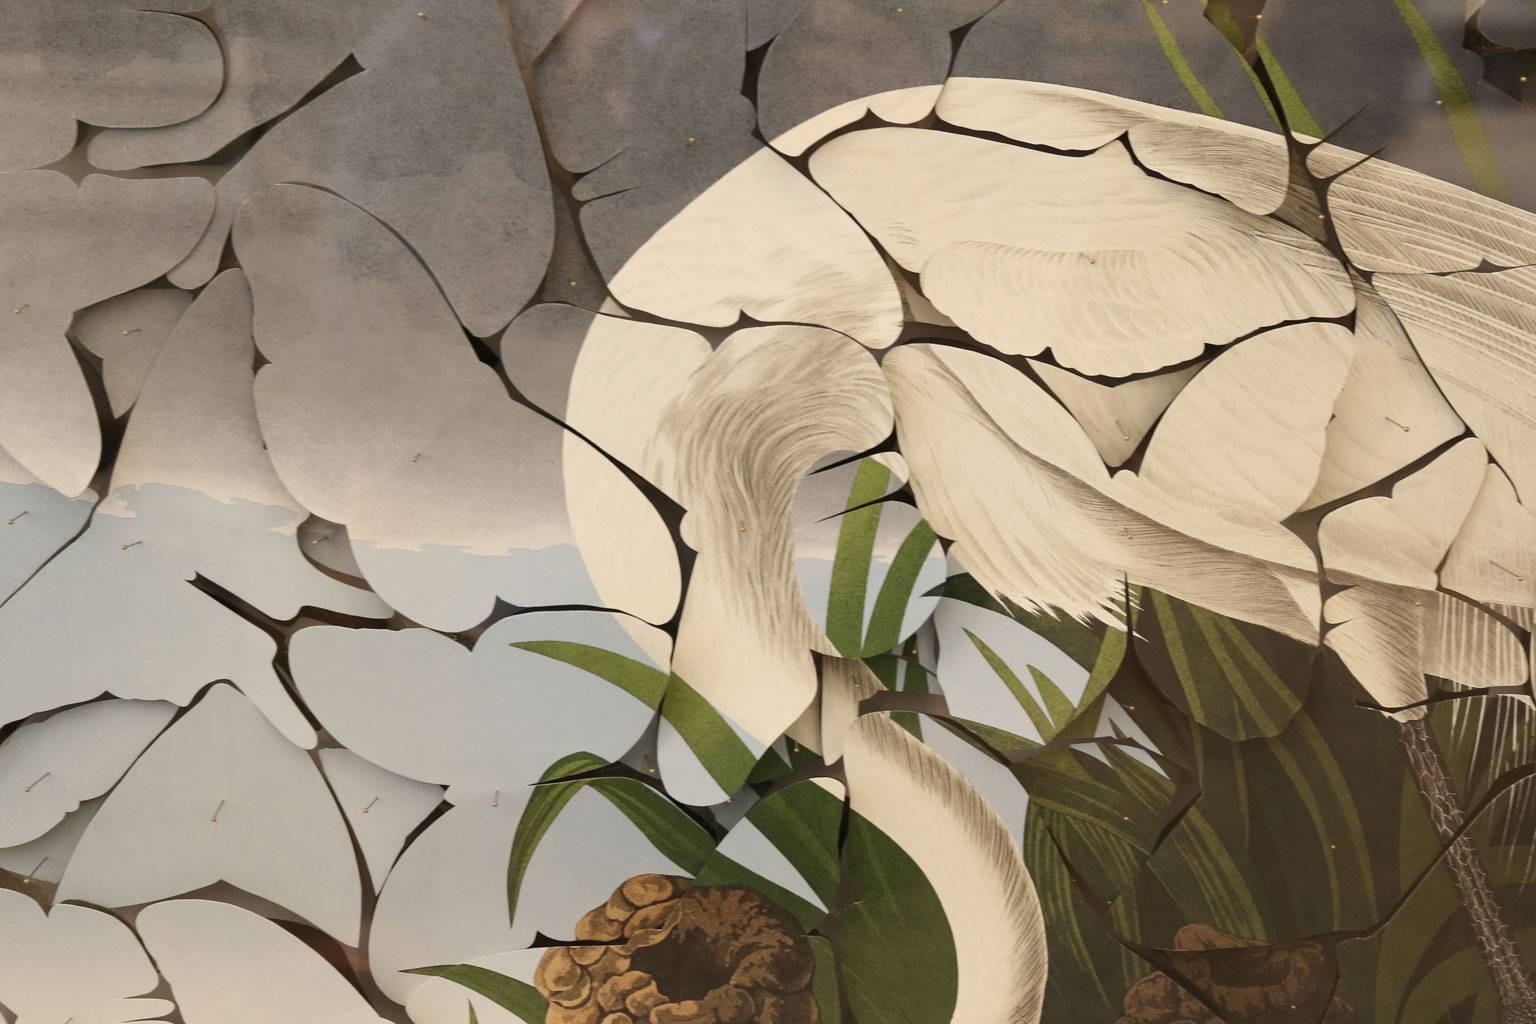 Butterfly box great egret. Vintage reprint of Robert Havell's 'Great Egret' (after John James Audubon, Loates Edition, 1981) cut into butterfly shapes and then pinned into their original position as specimen. Framed within a dark oak stained